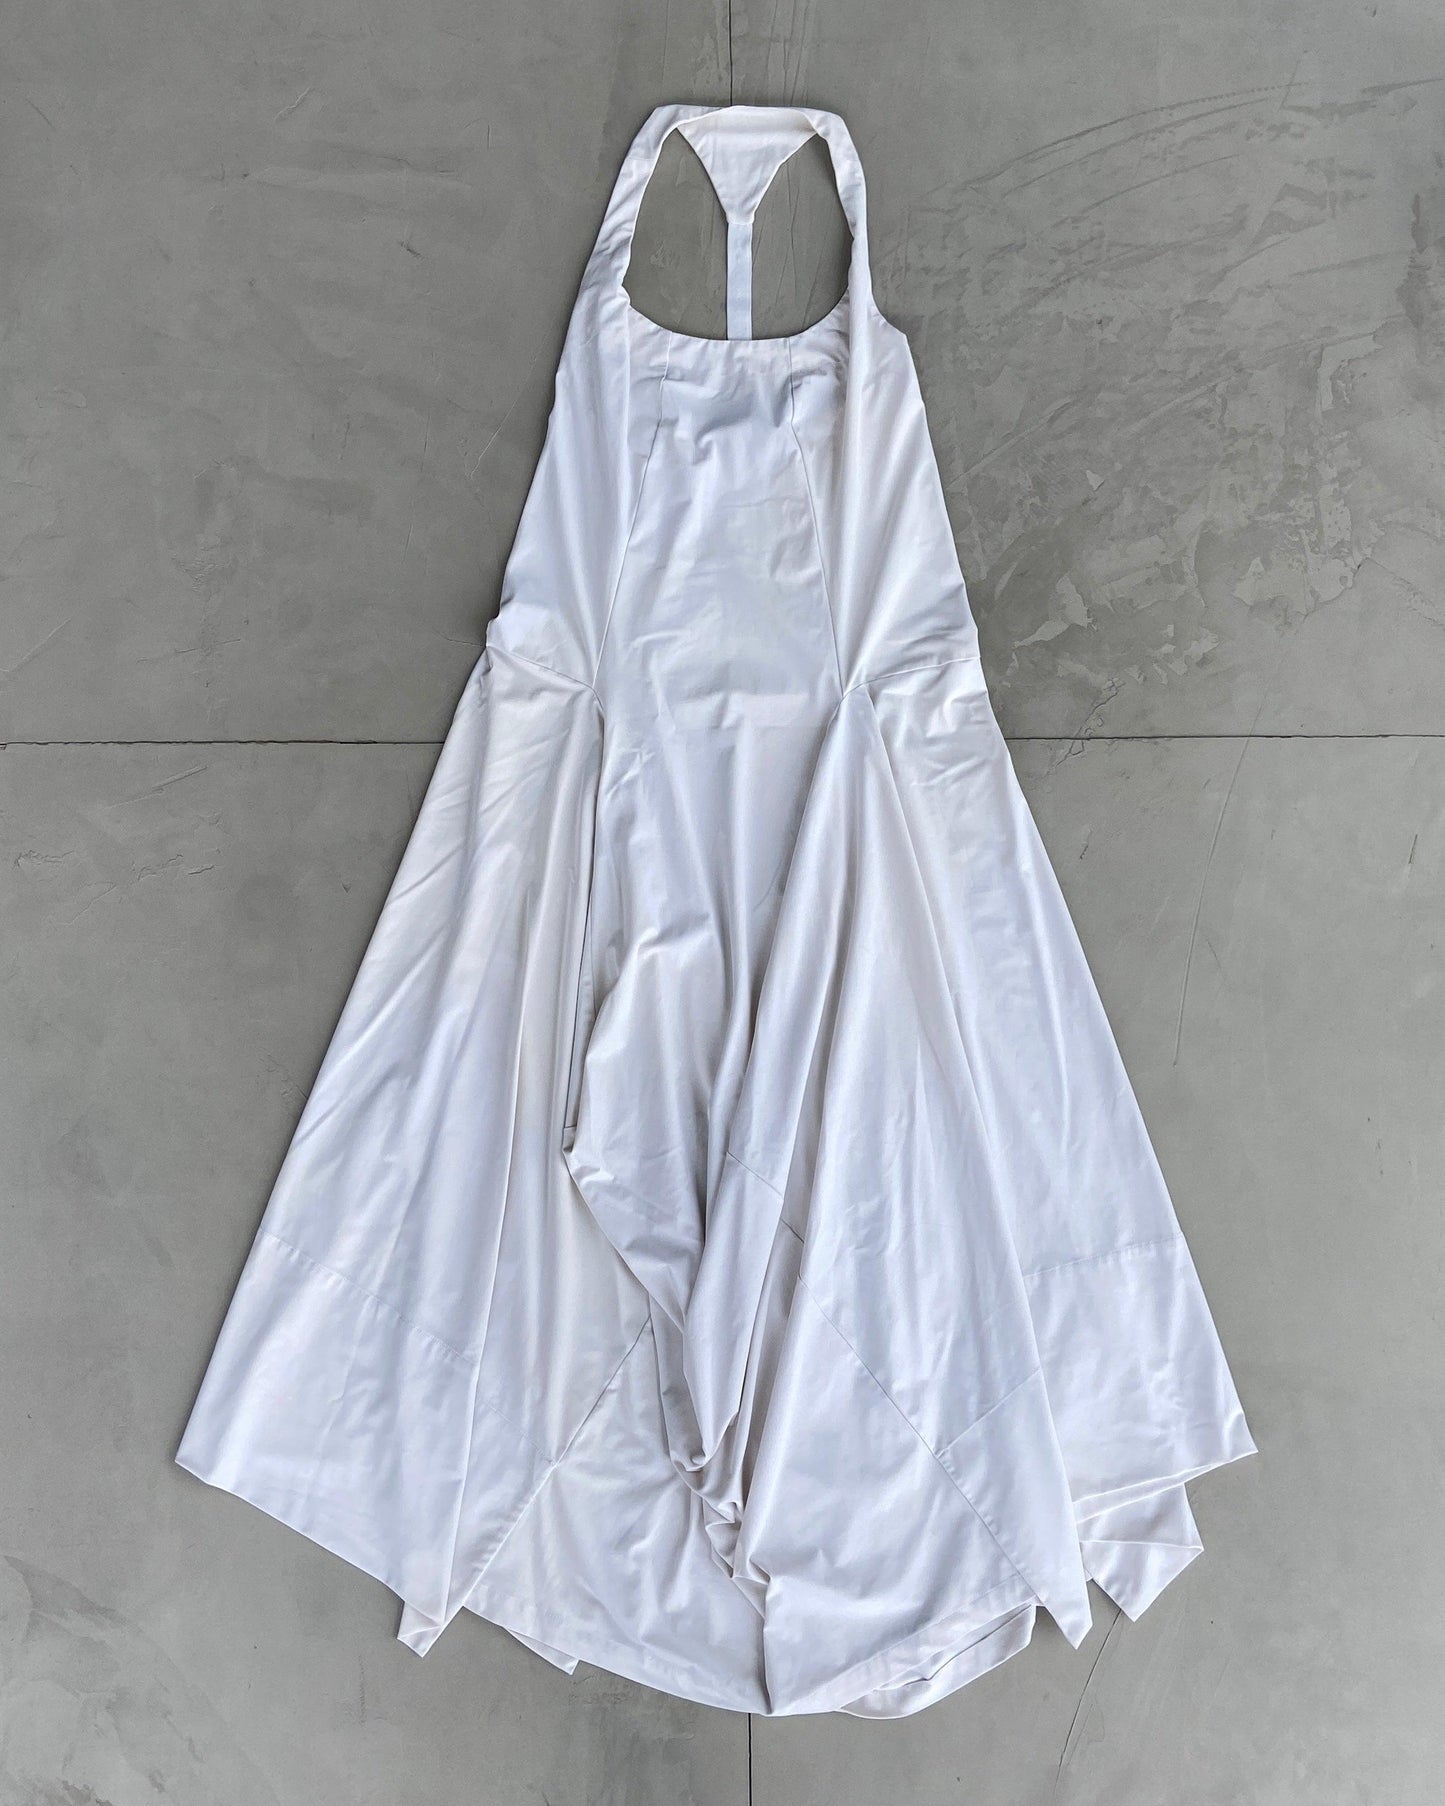 MARITHE FRANCOIS GIRBAUD MFG WHITE TRIANGLE DRESS - M - Known Source